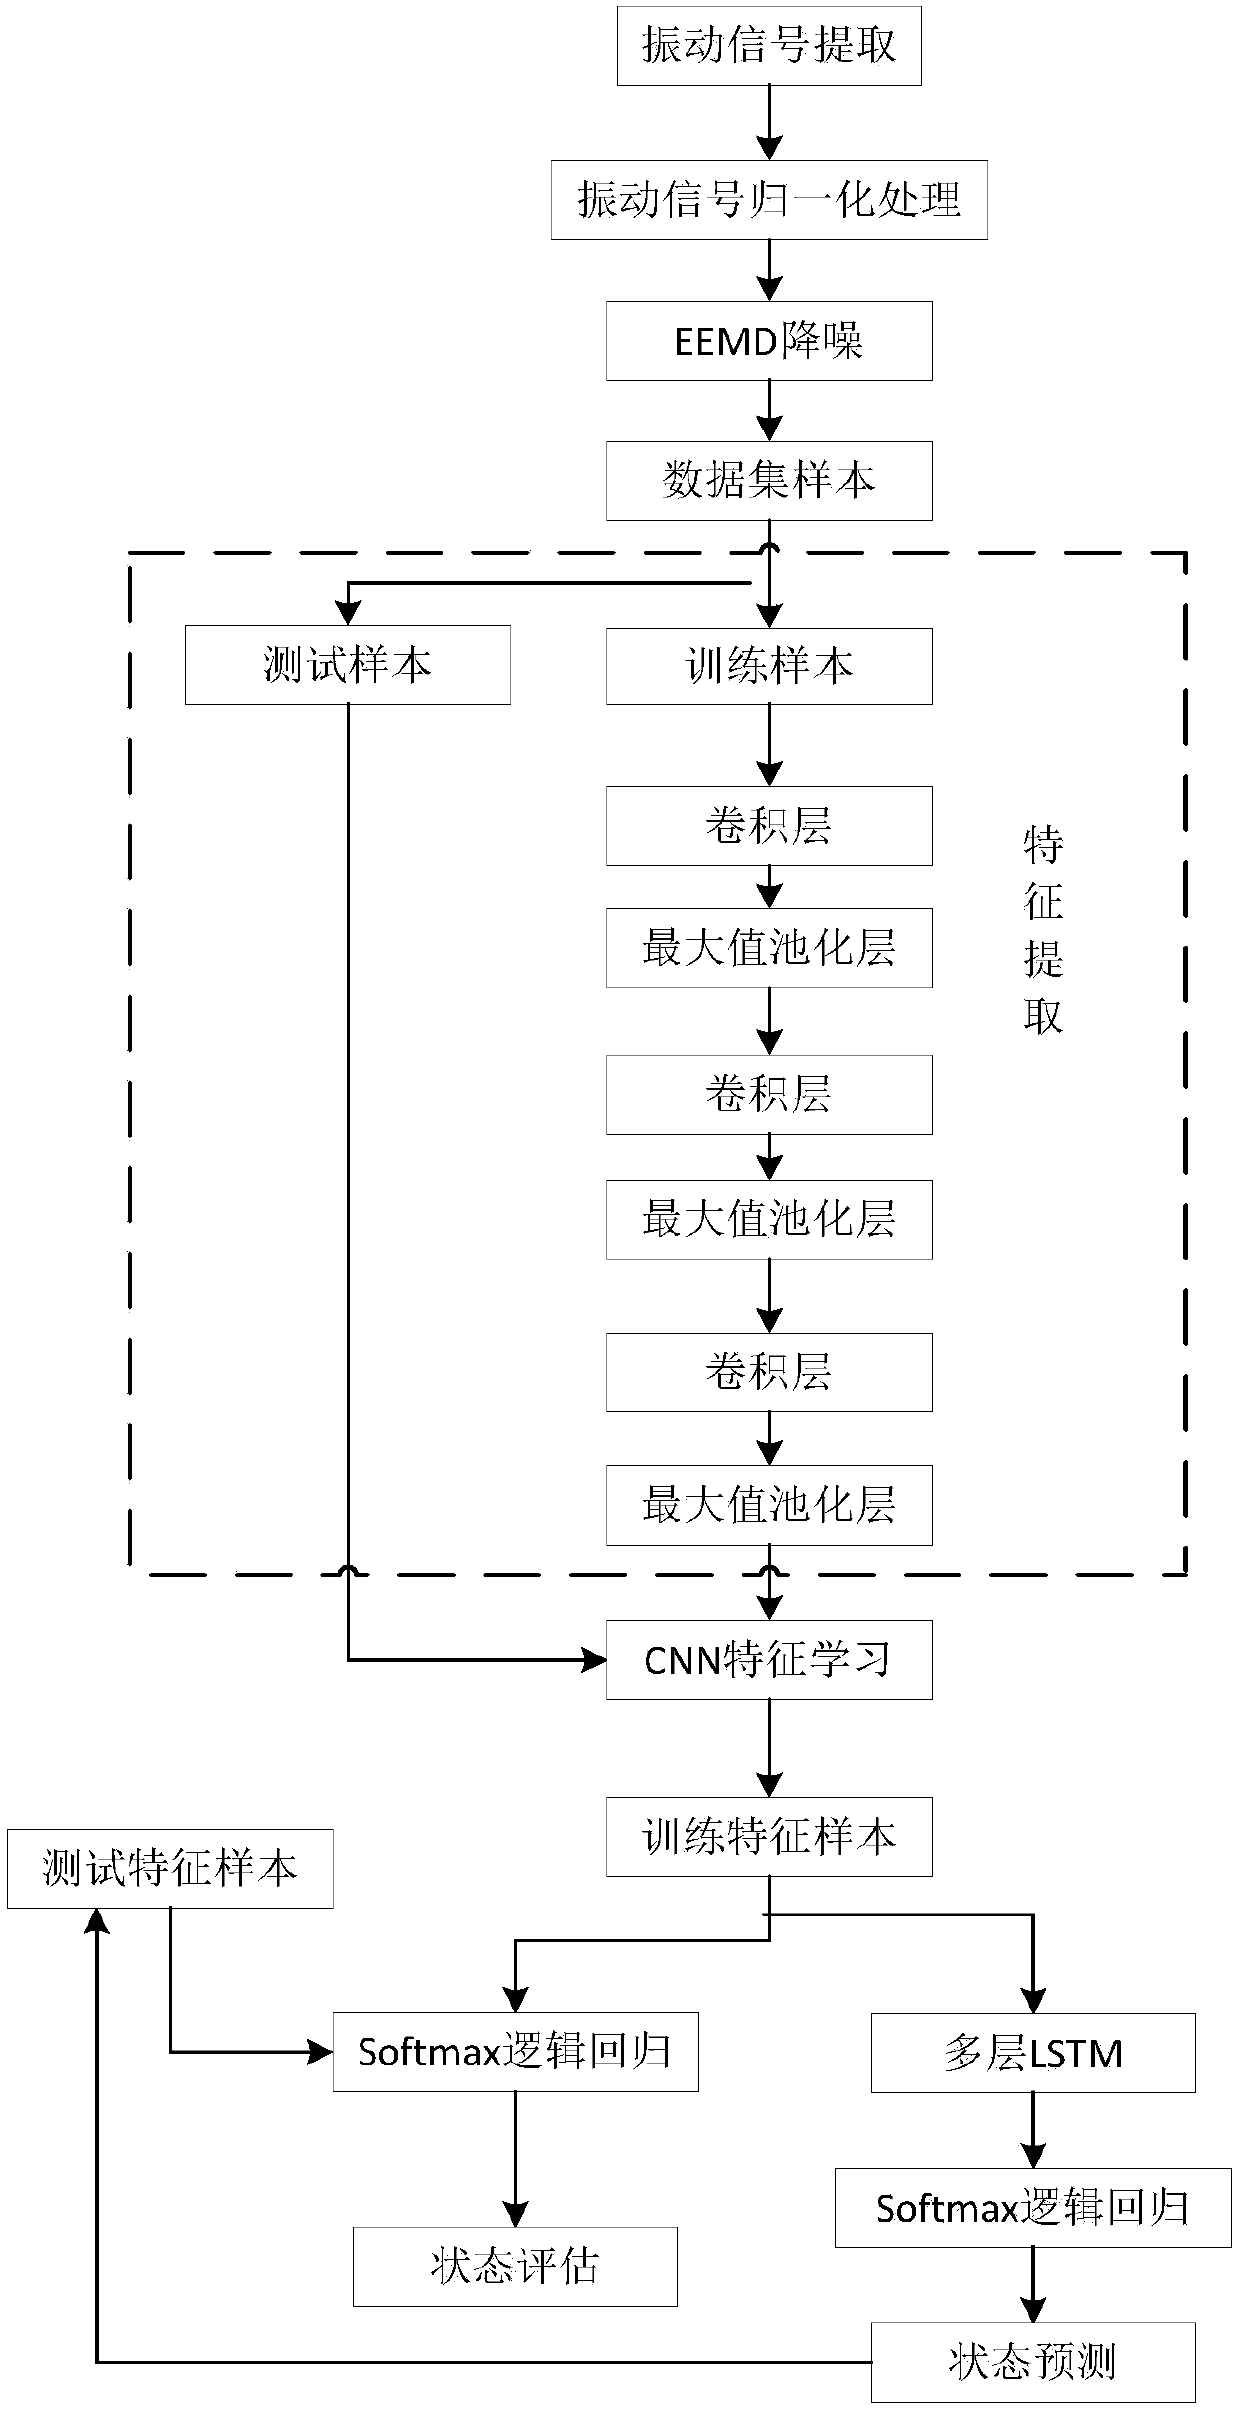 State recognition and prediction method for spindle characteristic test bench based on deep learning